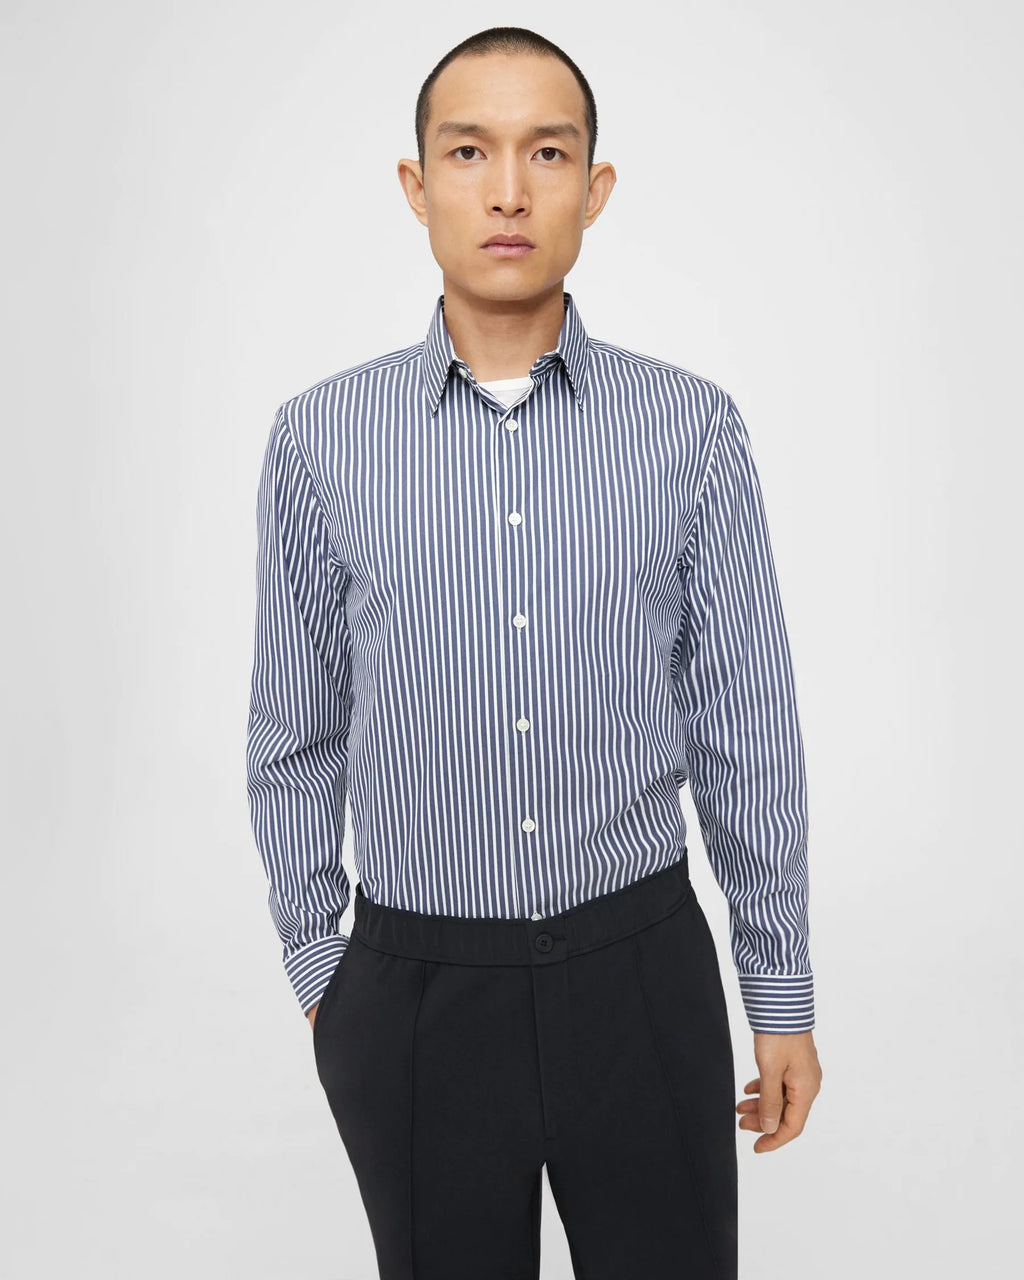 Theory Irving Shirt in Striped Good Cotton - Baltic/ White